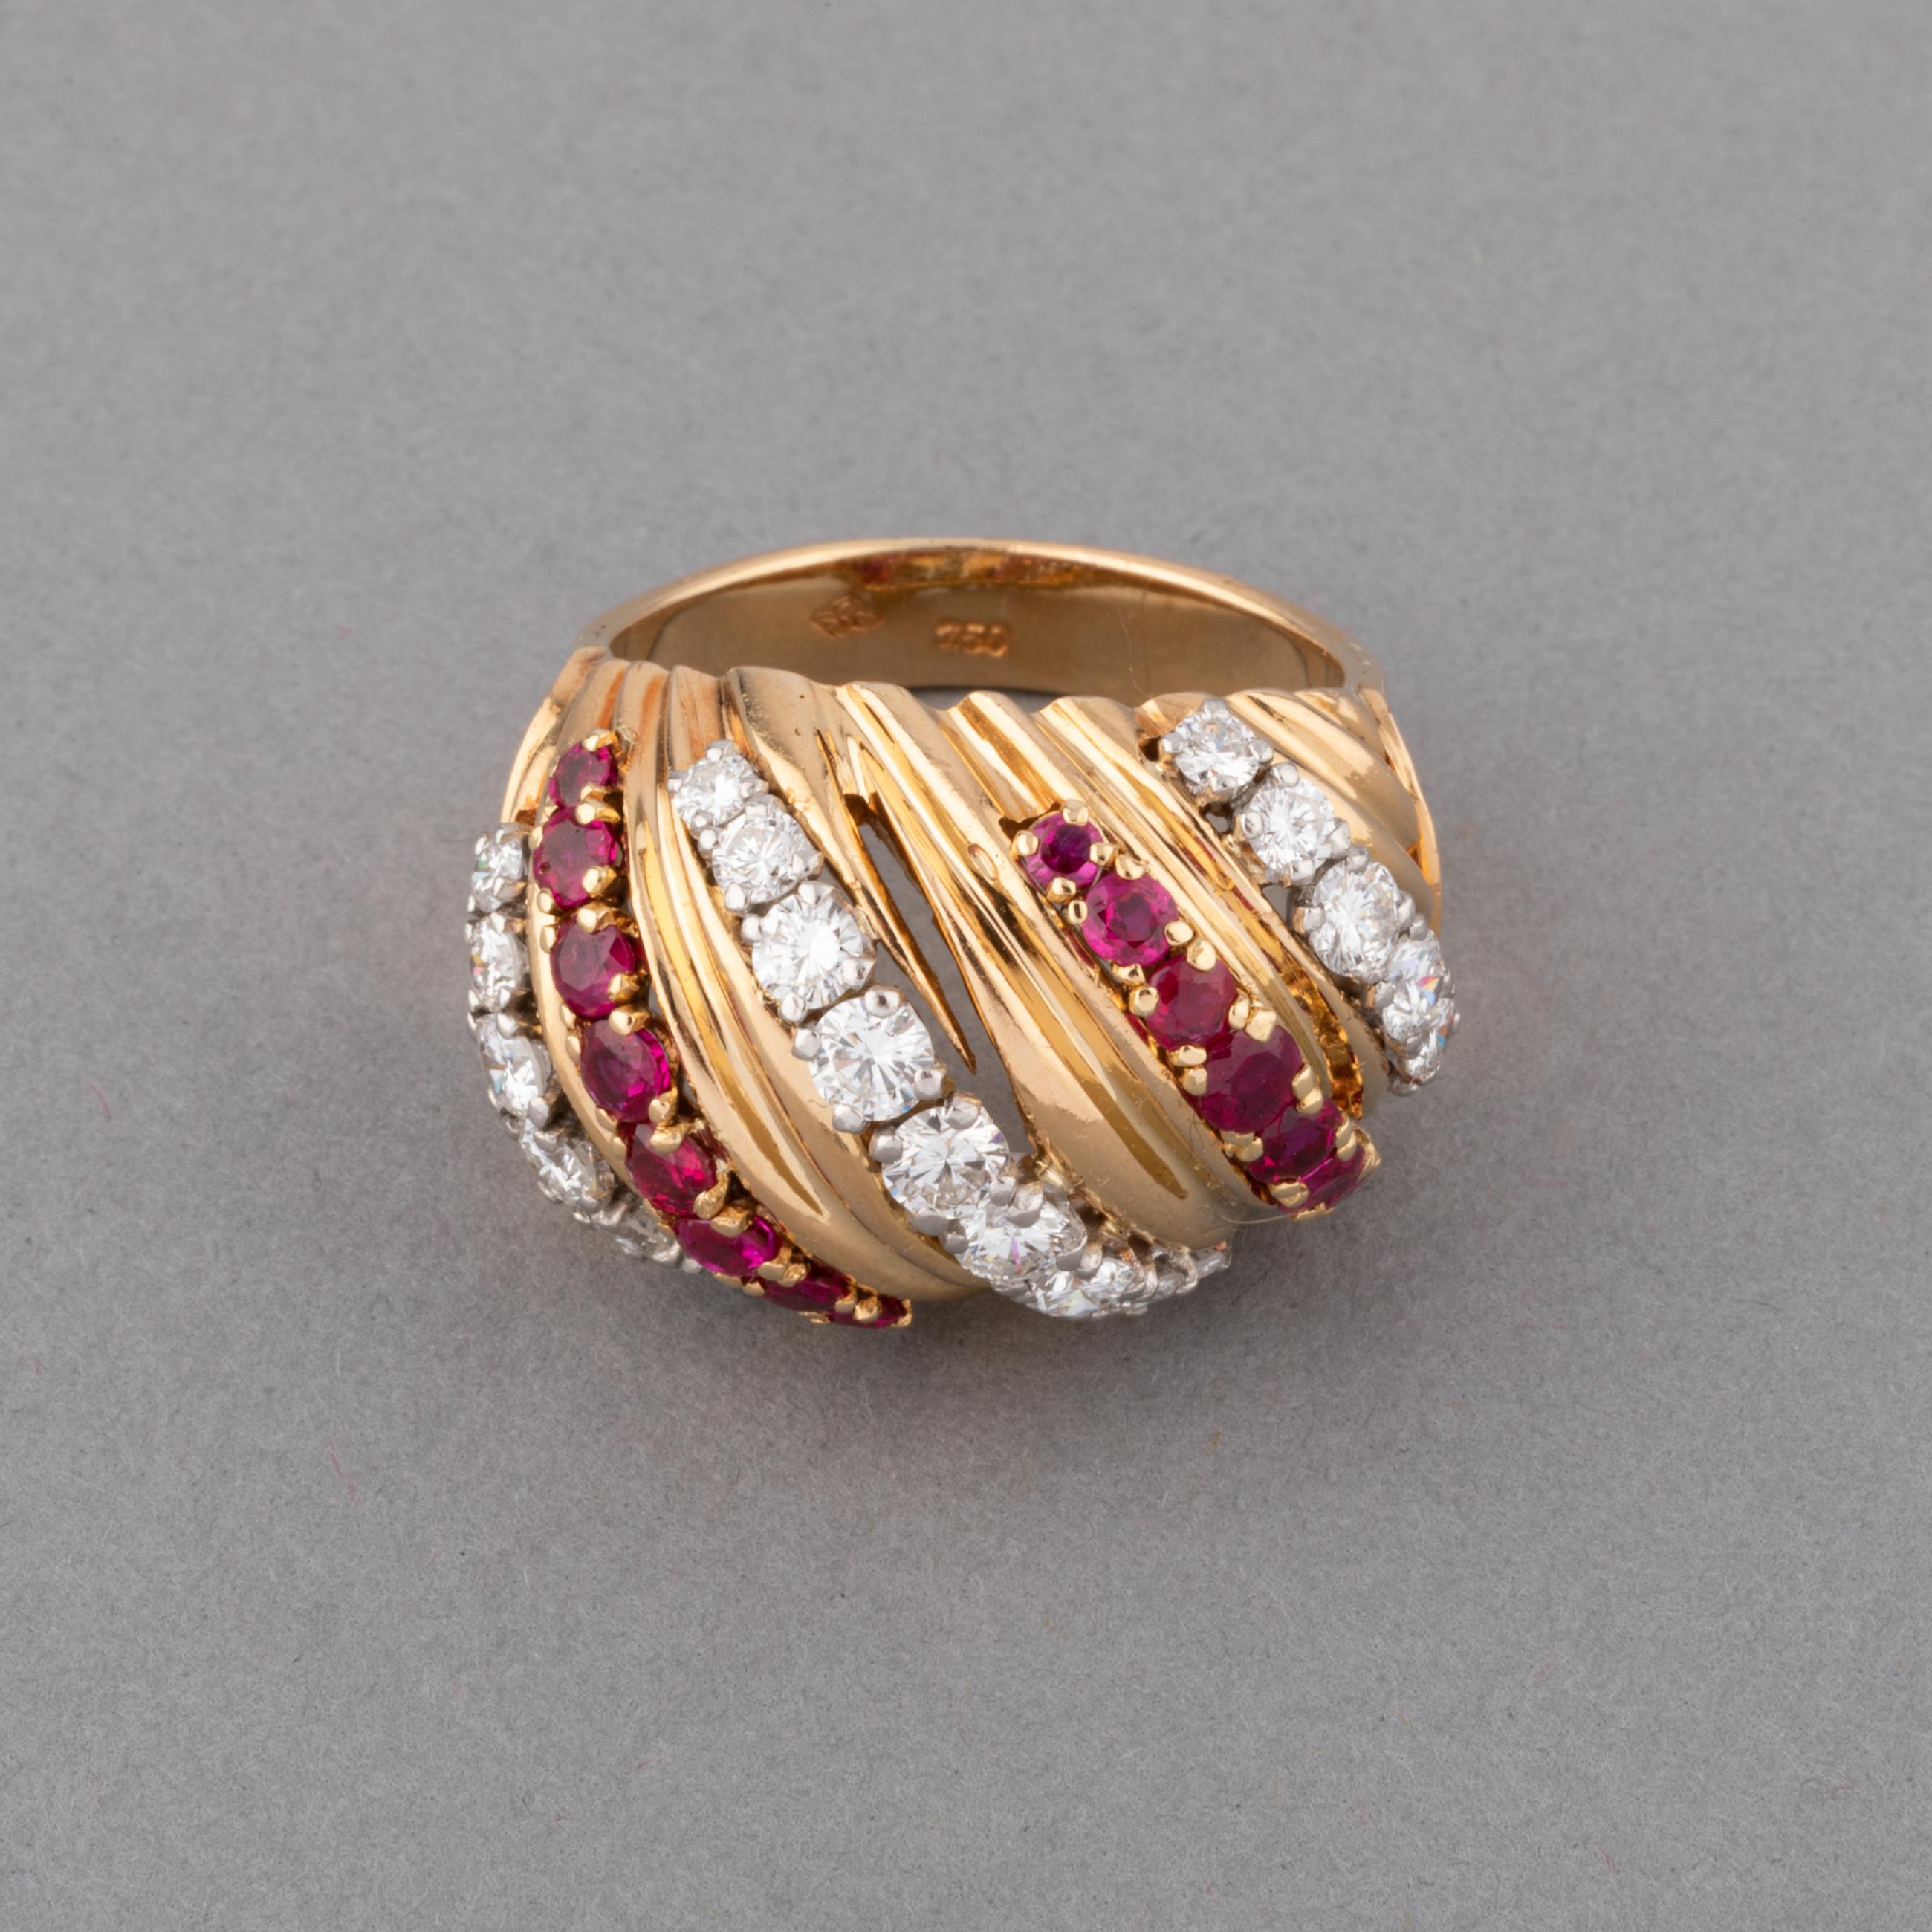 One lovely vintage ring, made circa 1960.
Made in yellow gold 18k, set with round diamonds and rubies. The diamonds weights 1.20 carats approximately.
Ring size is 6.75 USA or 54 Europe.